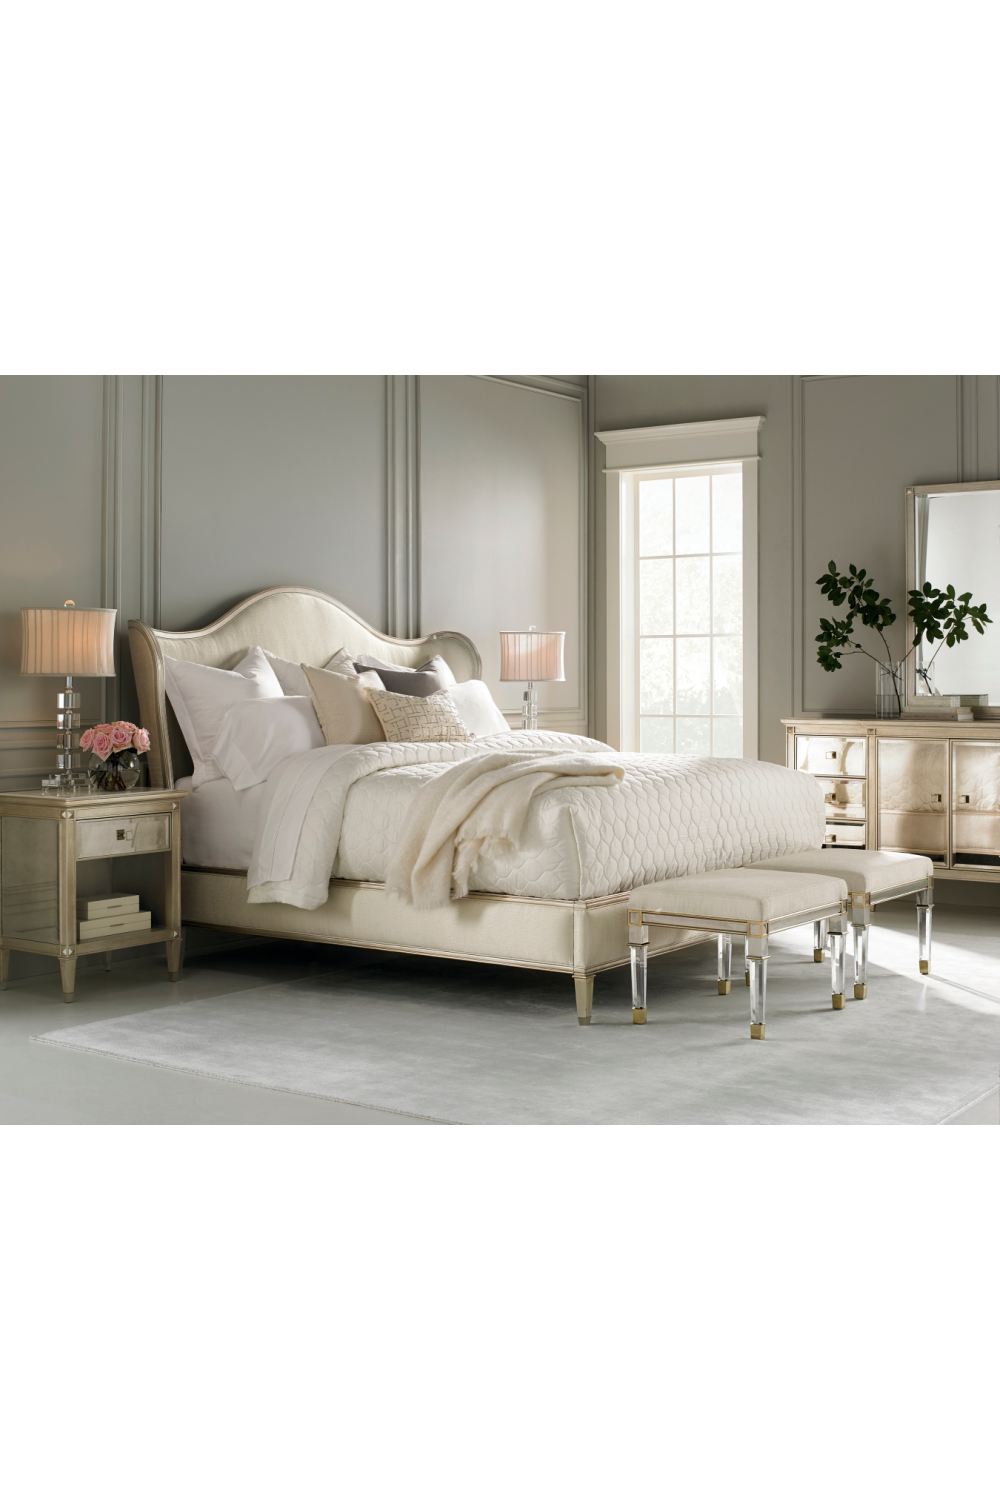 Winged Upholstered Bed | Caracole Bedtime Beauty | Oroa.com